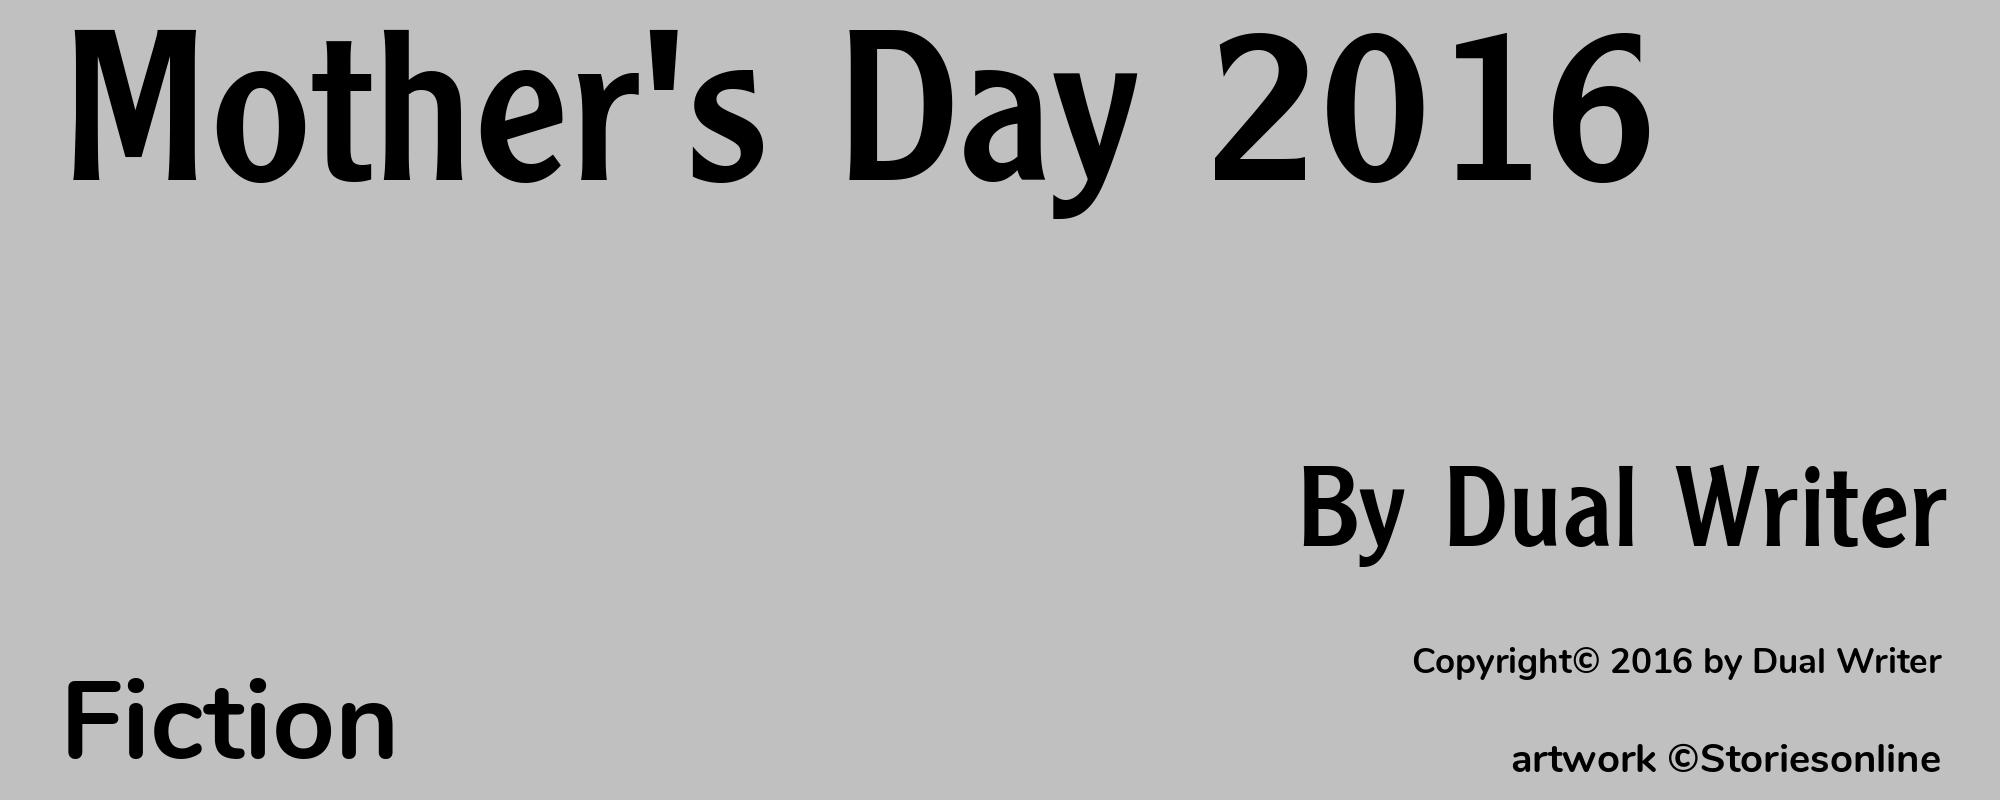 Mother's Day 2016 - Cover